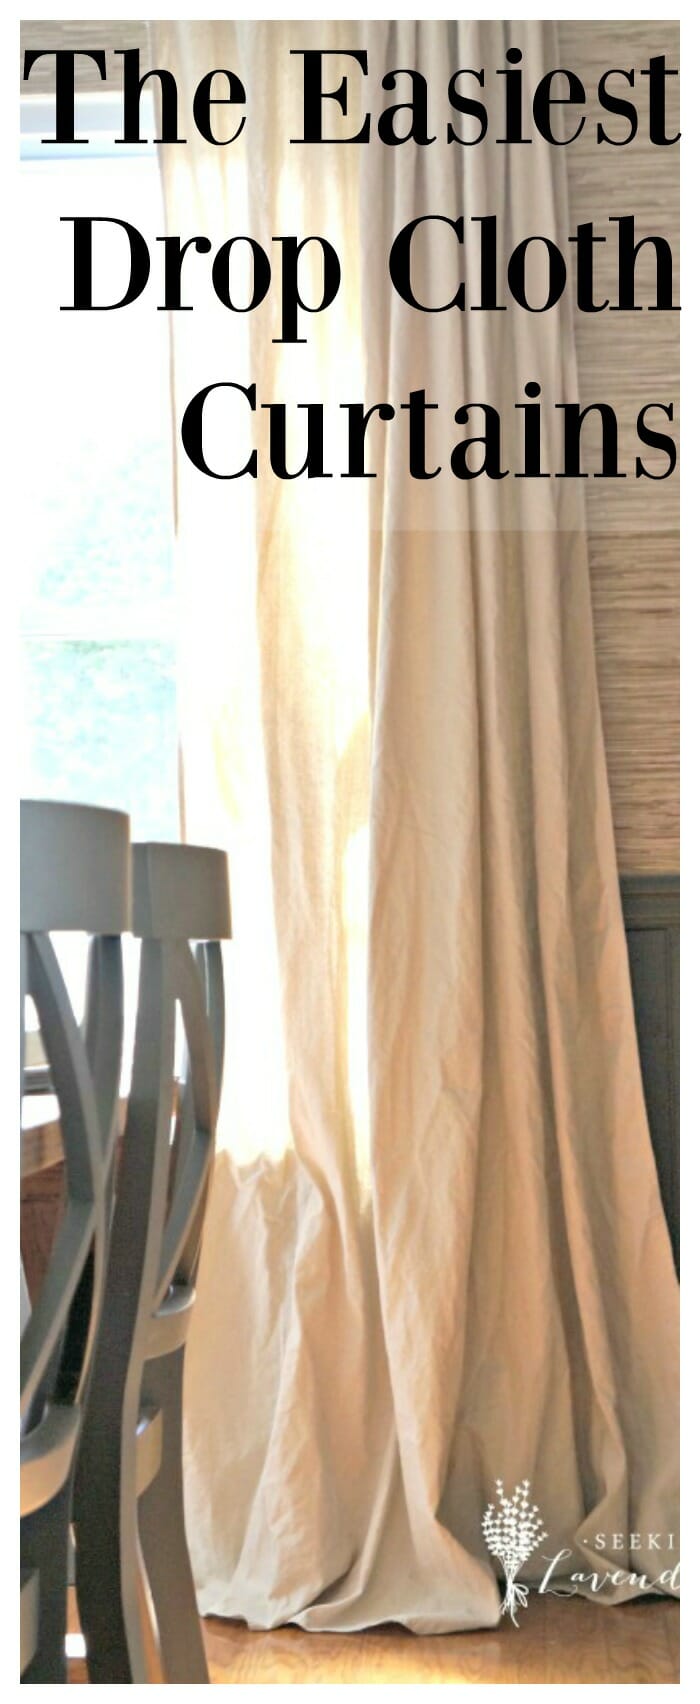 The Easiest Drop Cloth Curtains